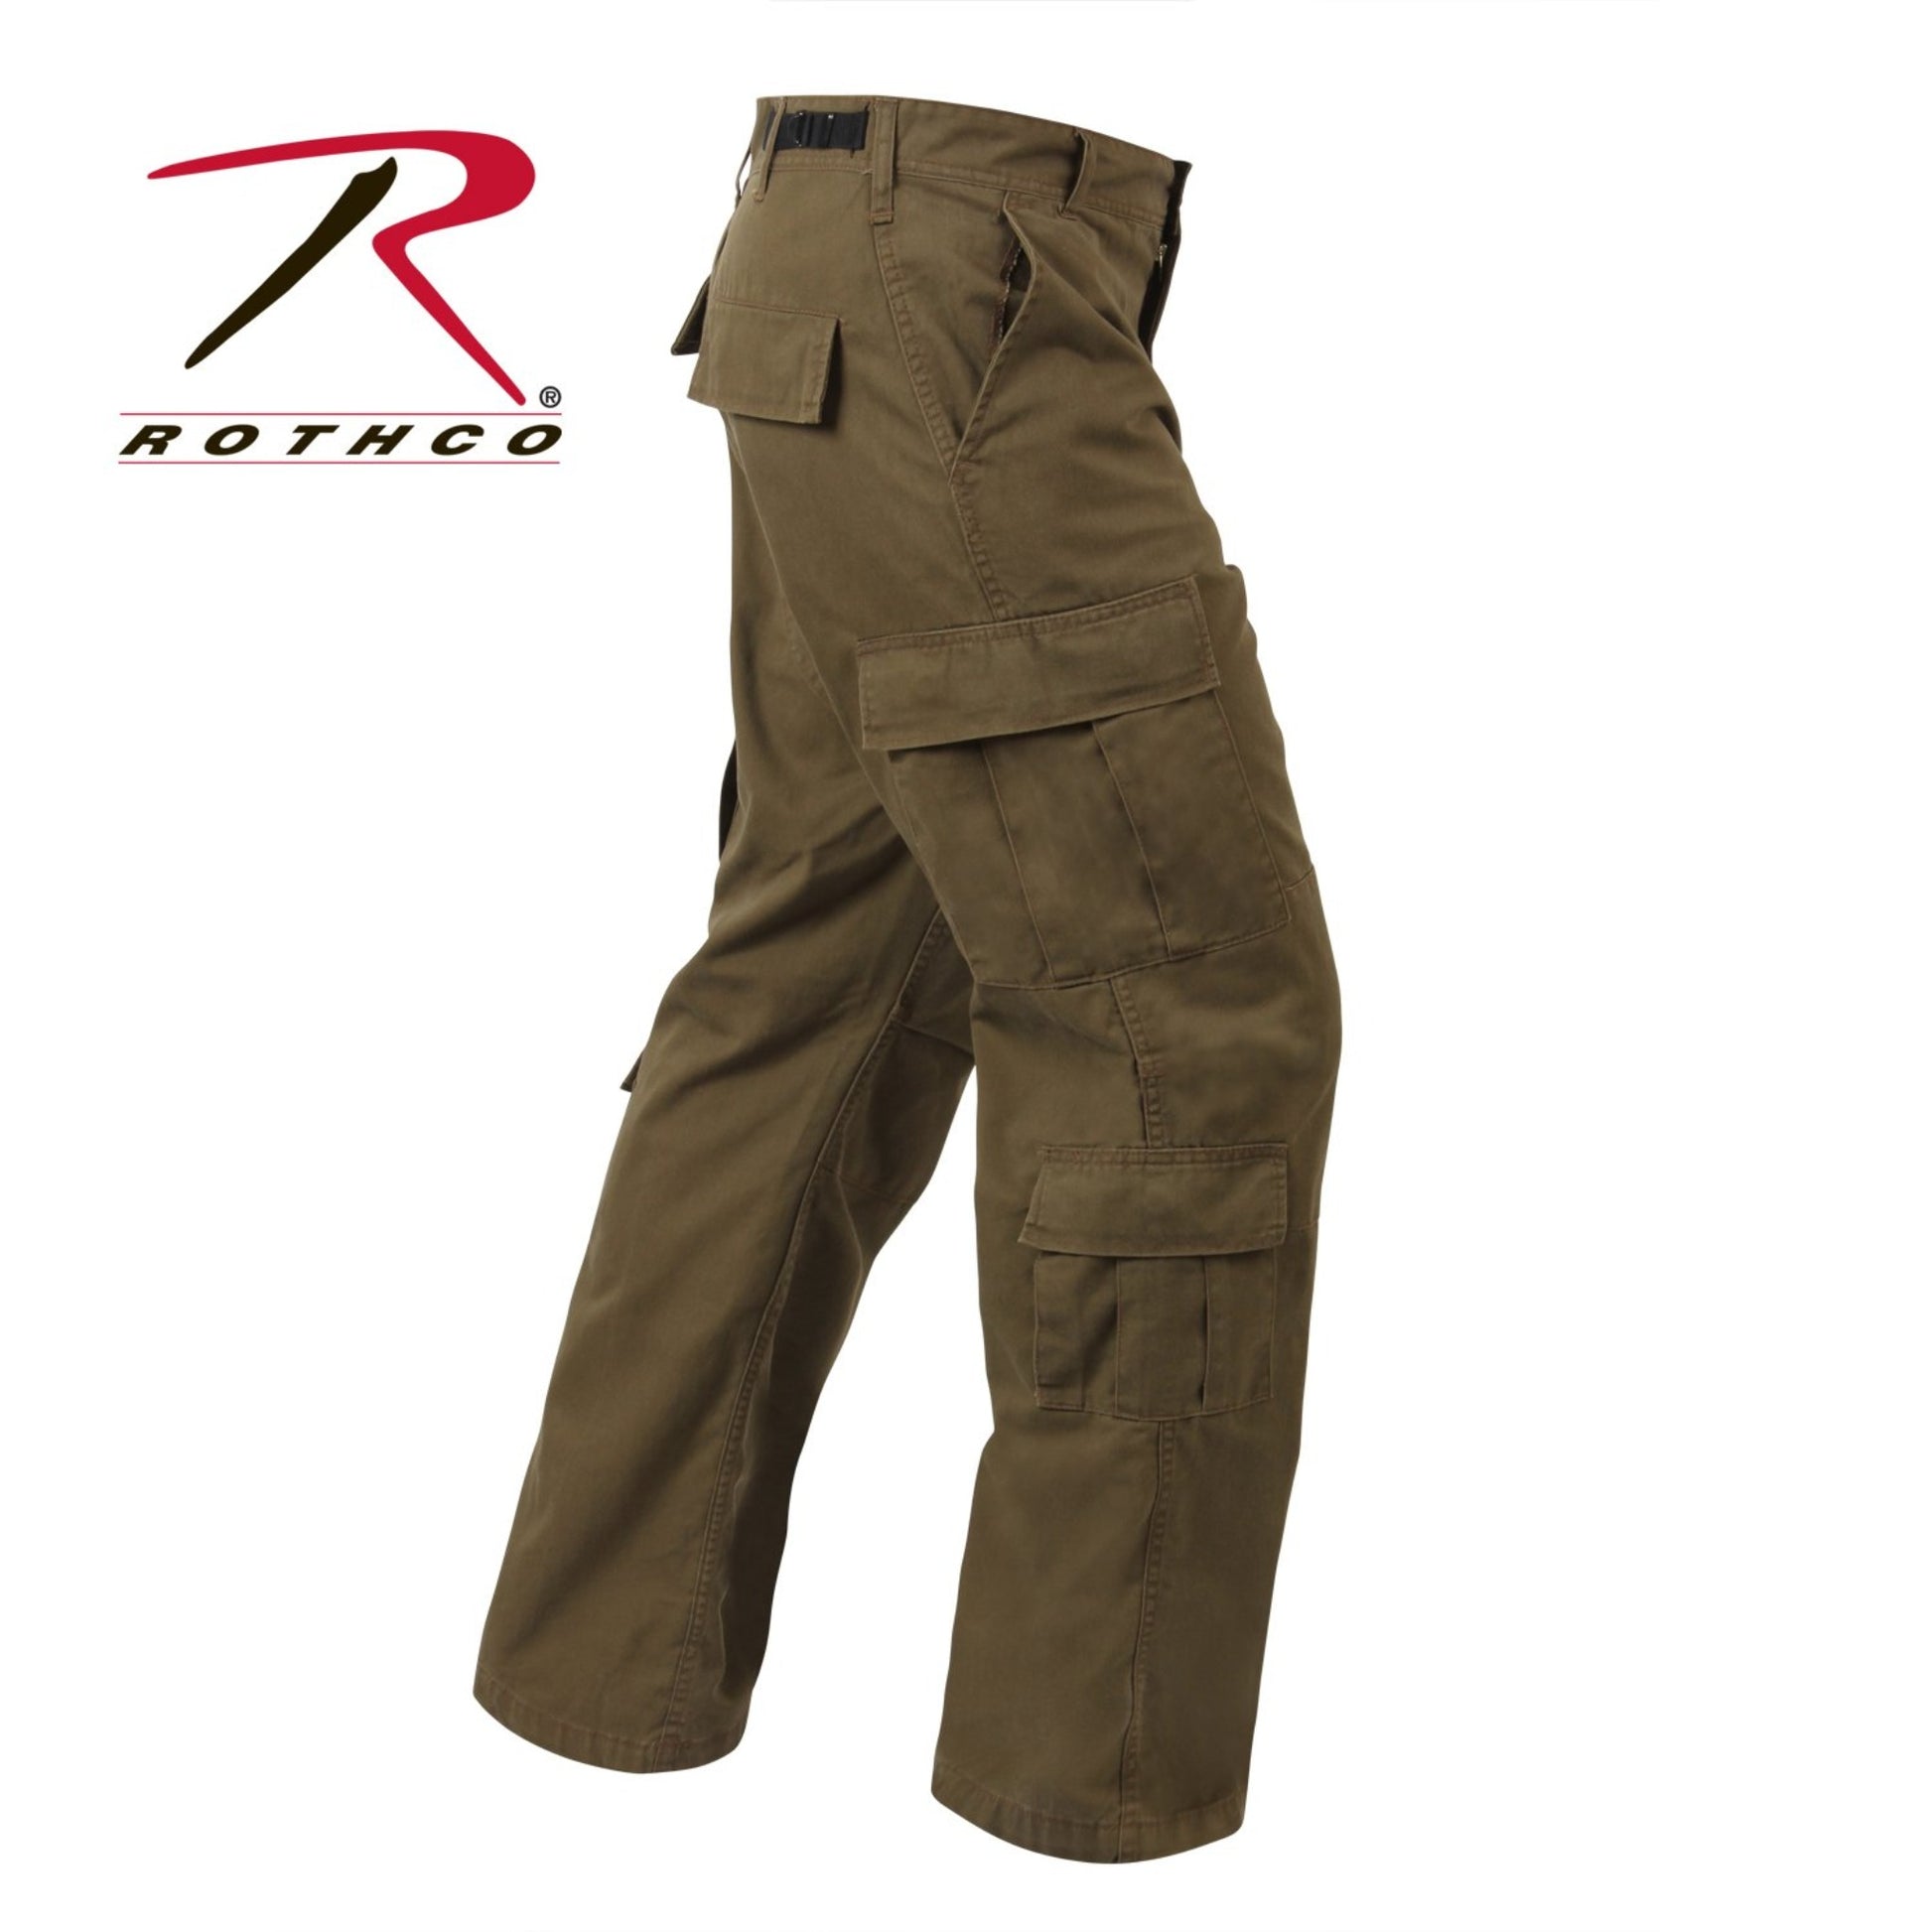 Paratrooper Fatigue Pants, Vintage Style – The Supply Sergeant